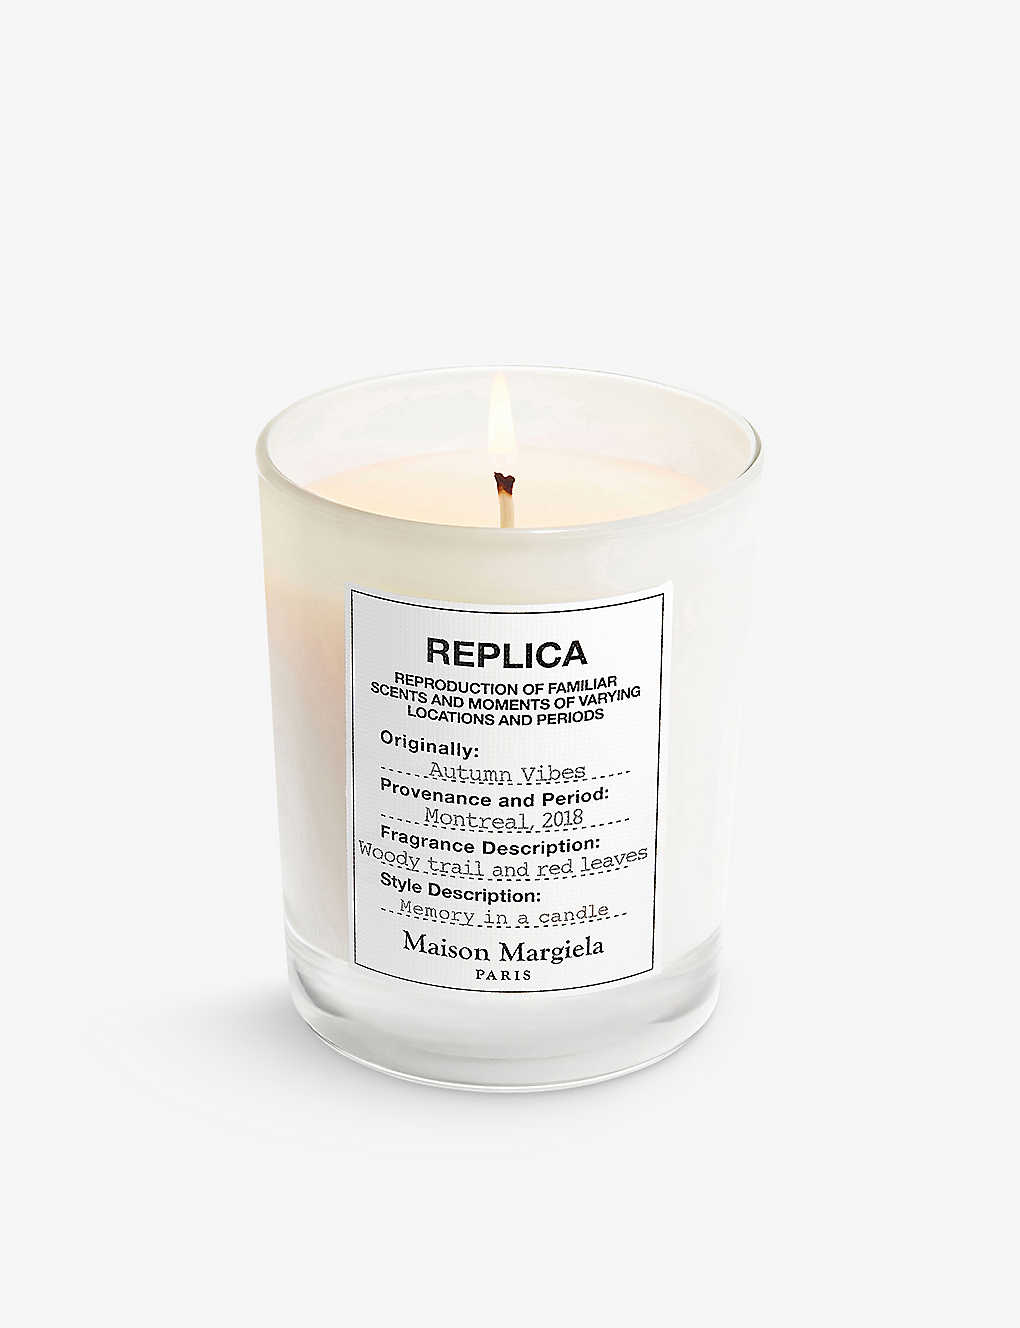 Maison Margiela Replica Autumn Vibes Scented Candle 165g